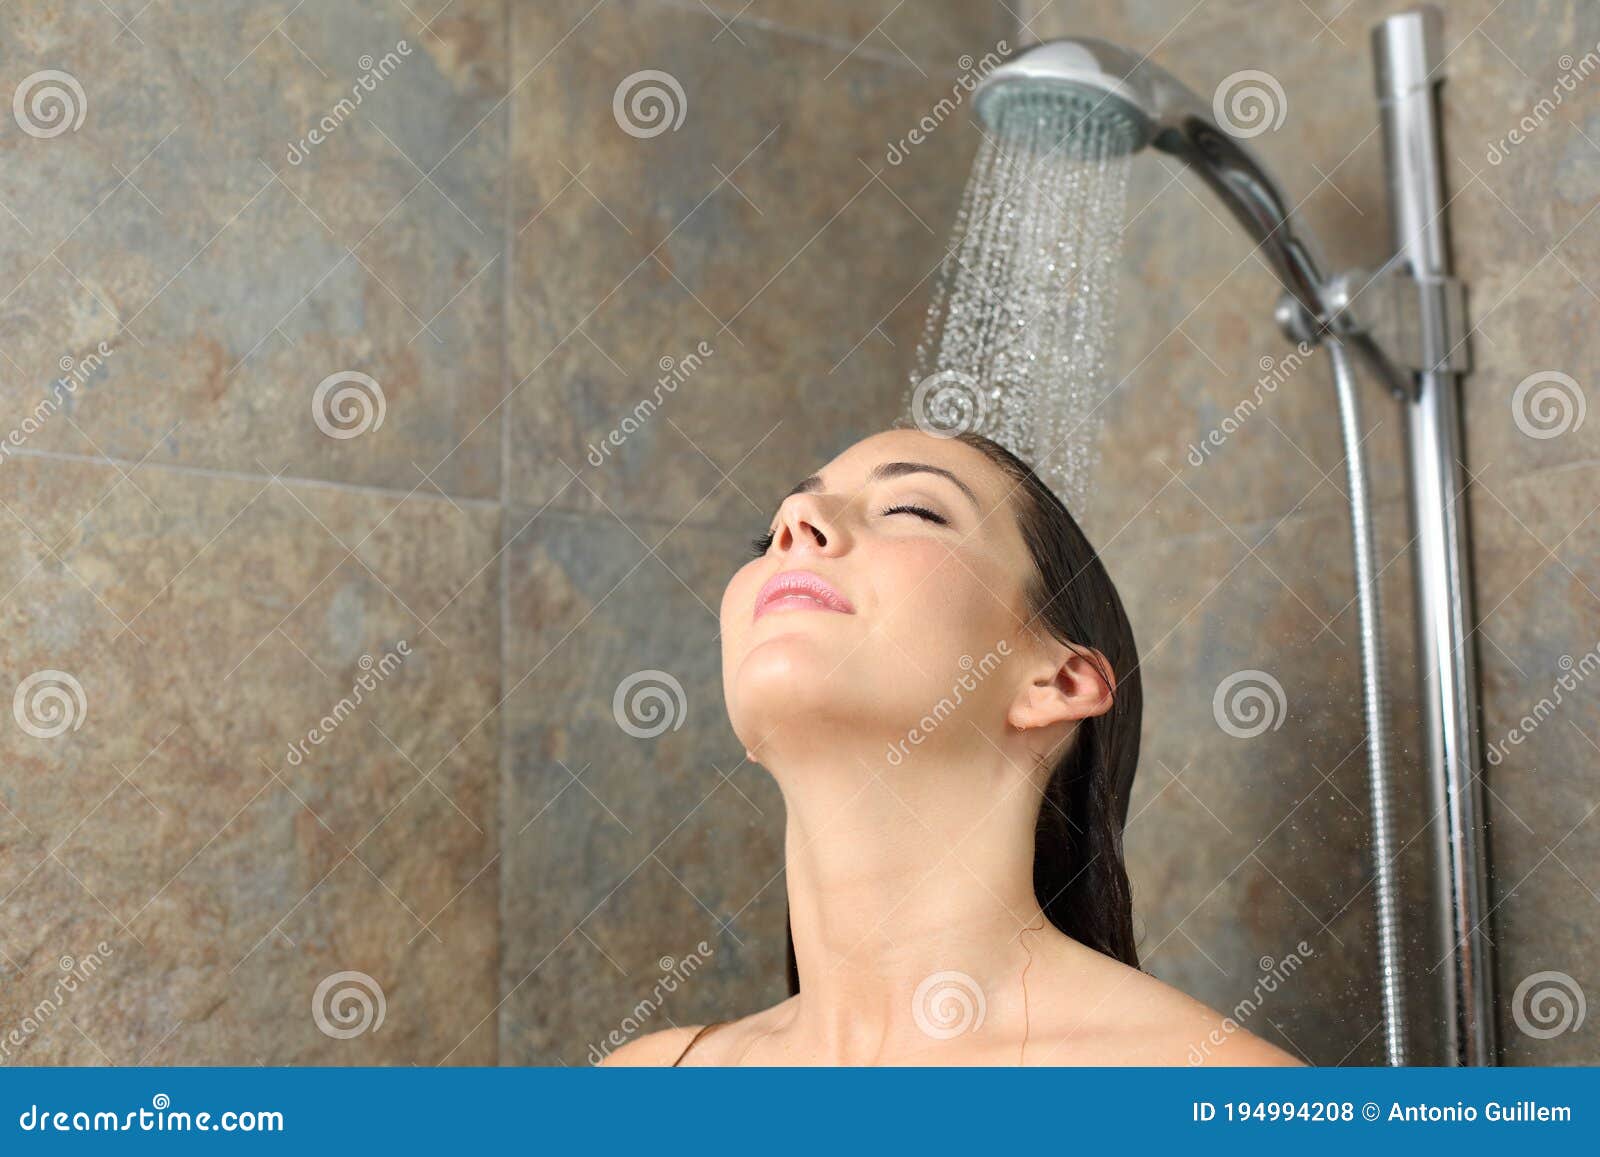 carl abes reccomend getting head in the shower pic